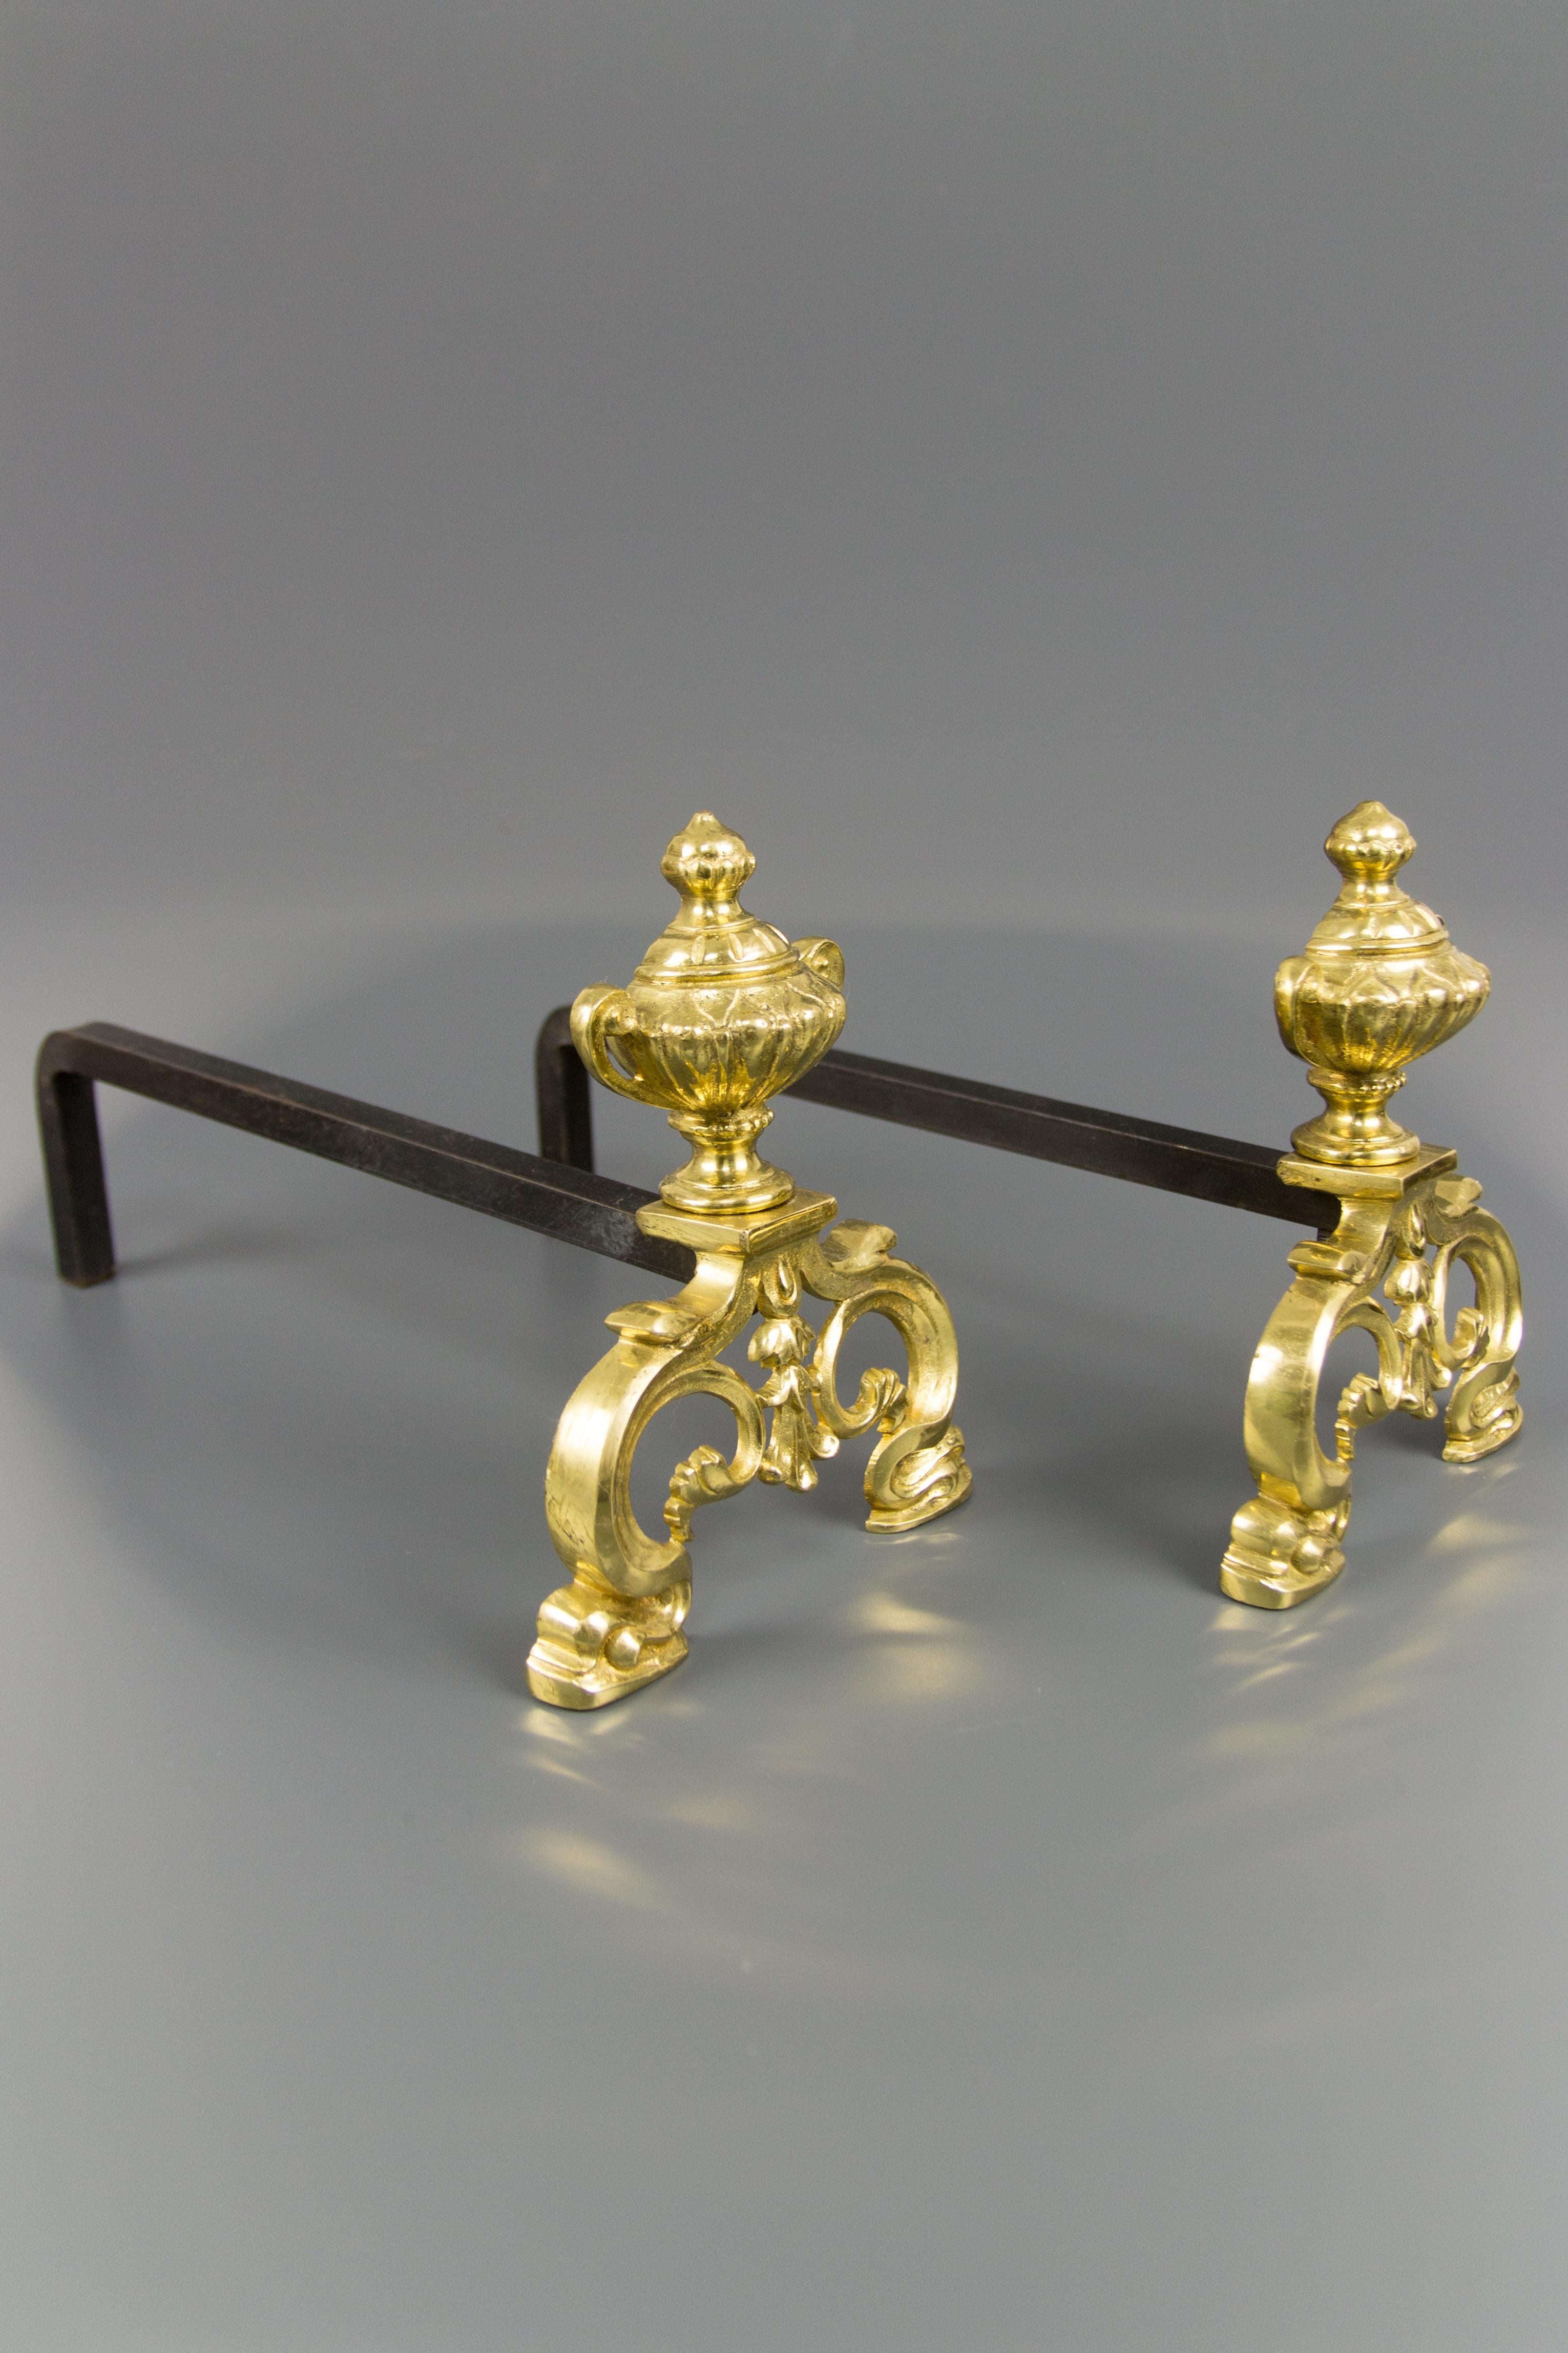 Mid-20th Century Baroque Style Gilt Bronze and Iron Andirons or Fire Dogs